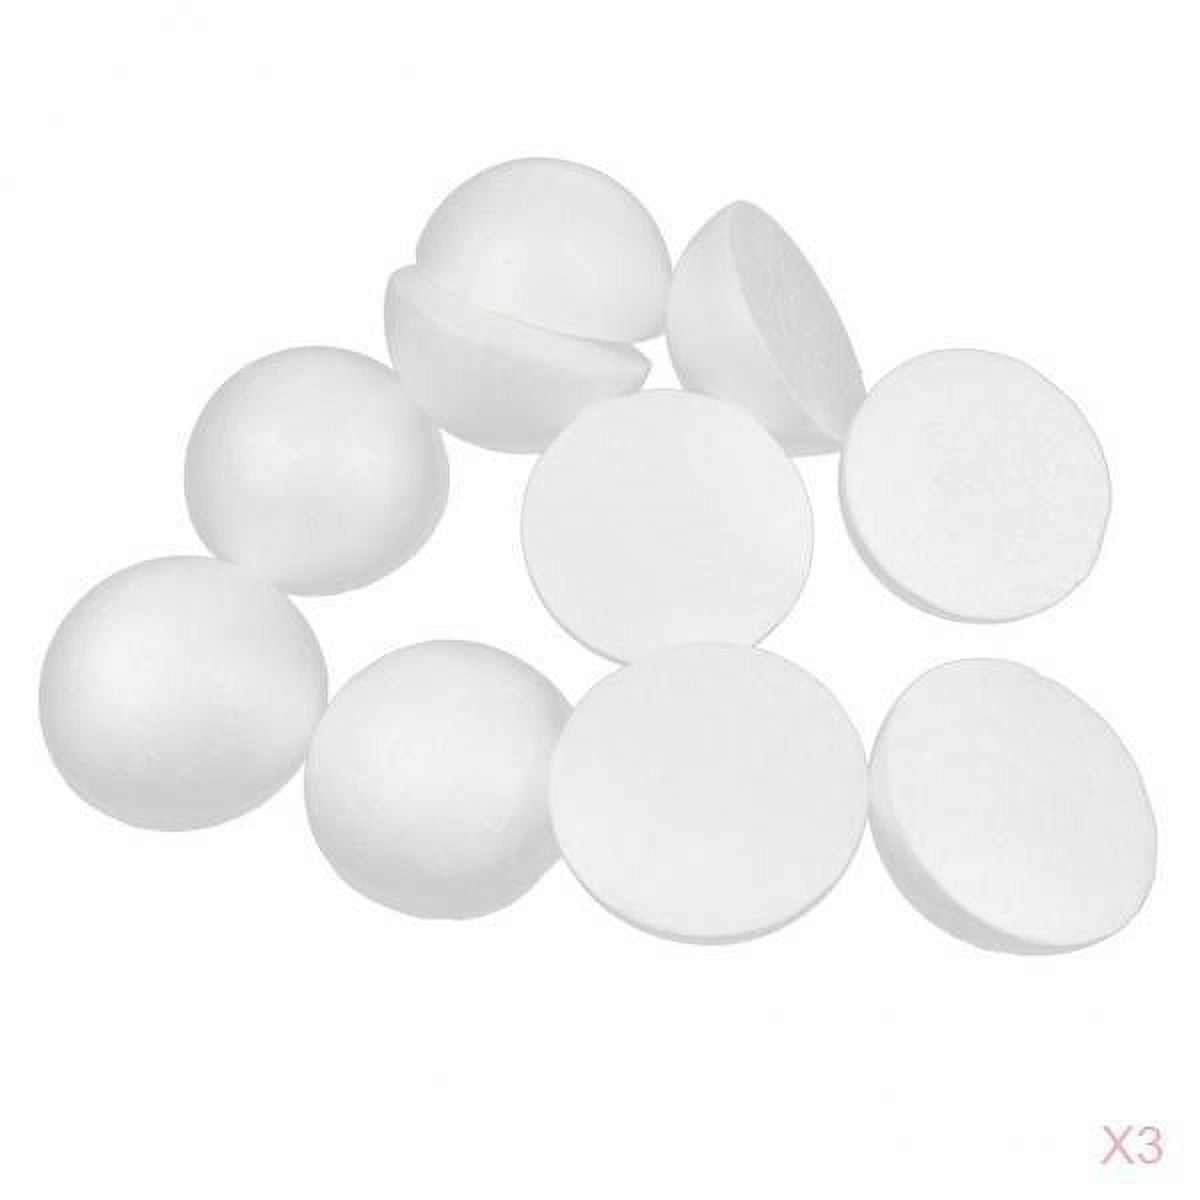 4x1 Soft Smooth Round Foam Circles W/flat Sides, for Ornaments, 4